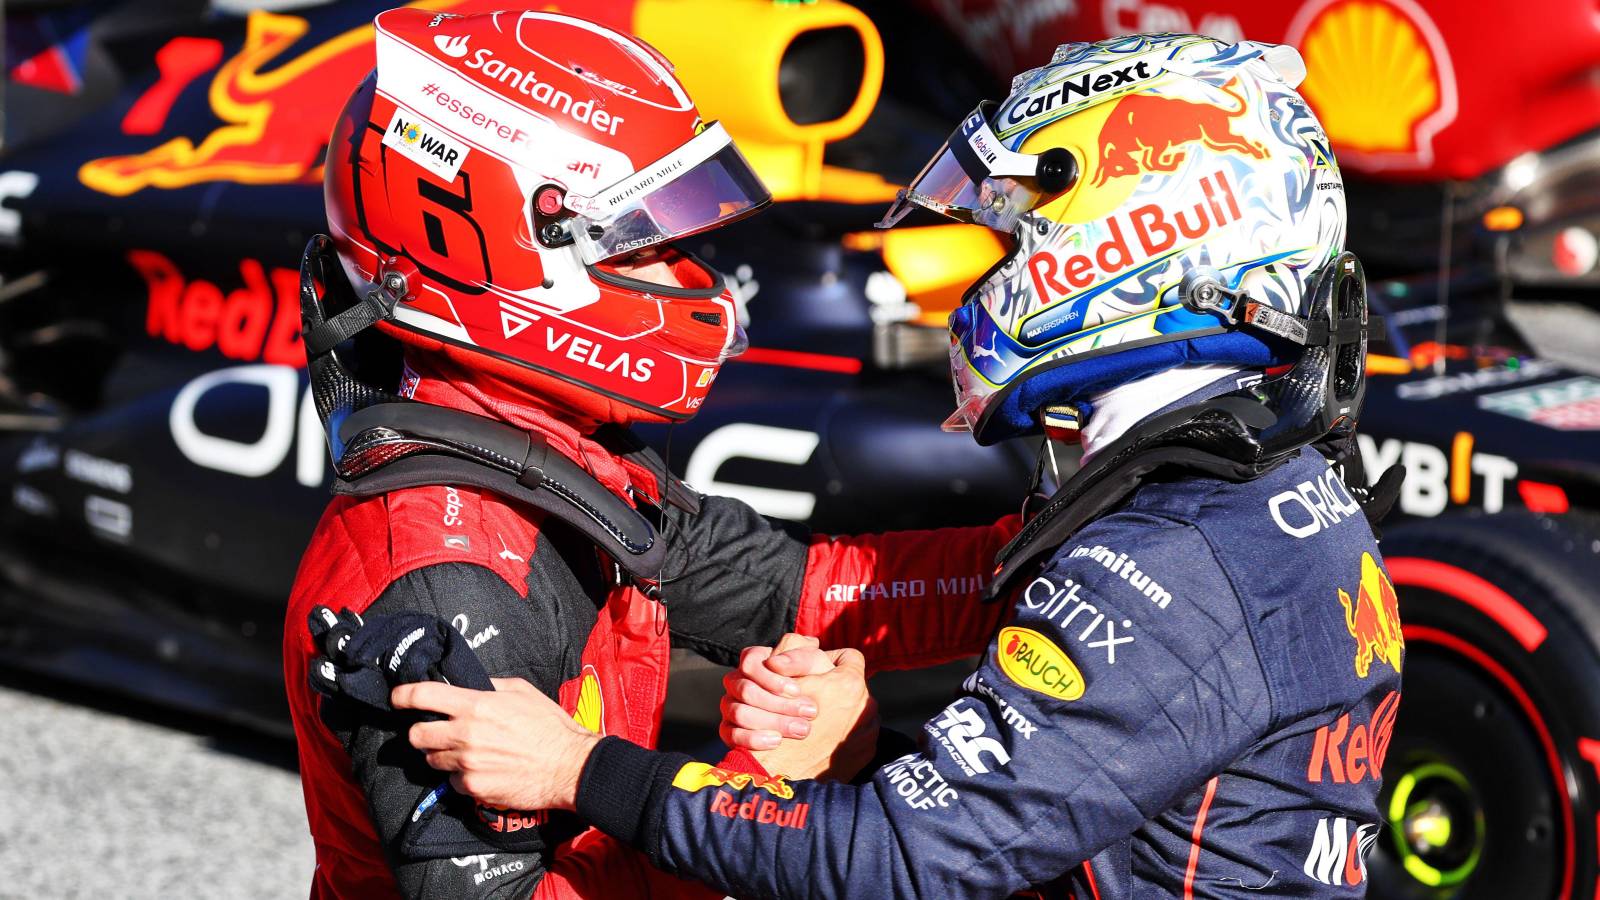 Max will definitely become World Champion this year'